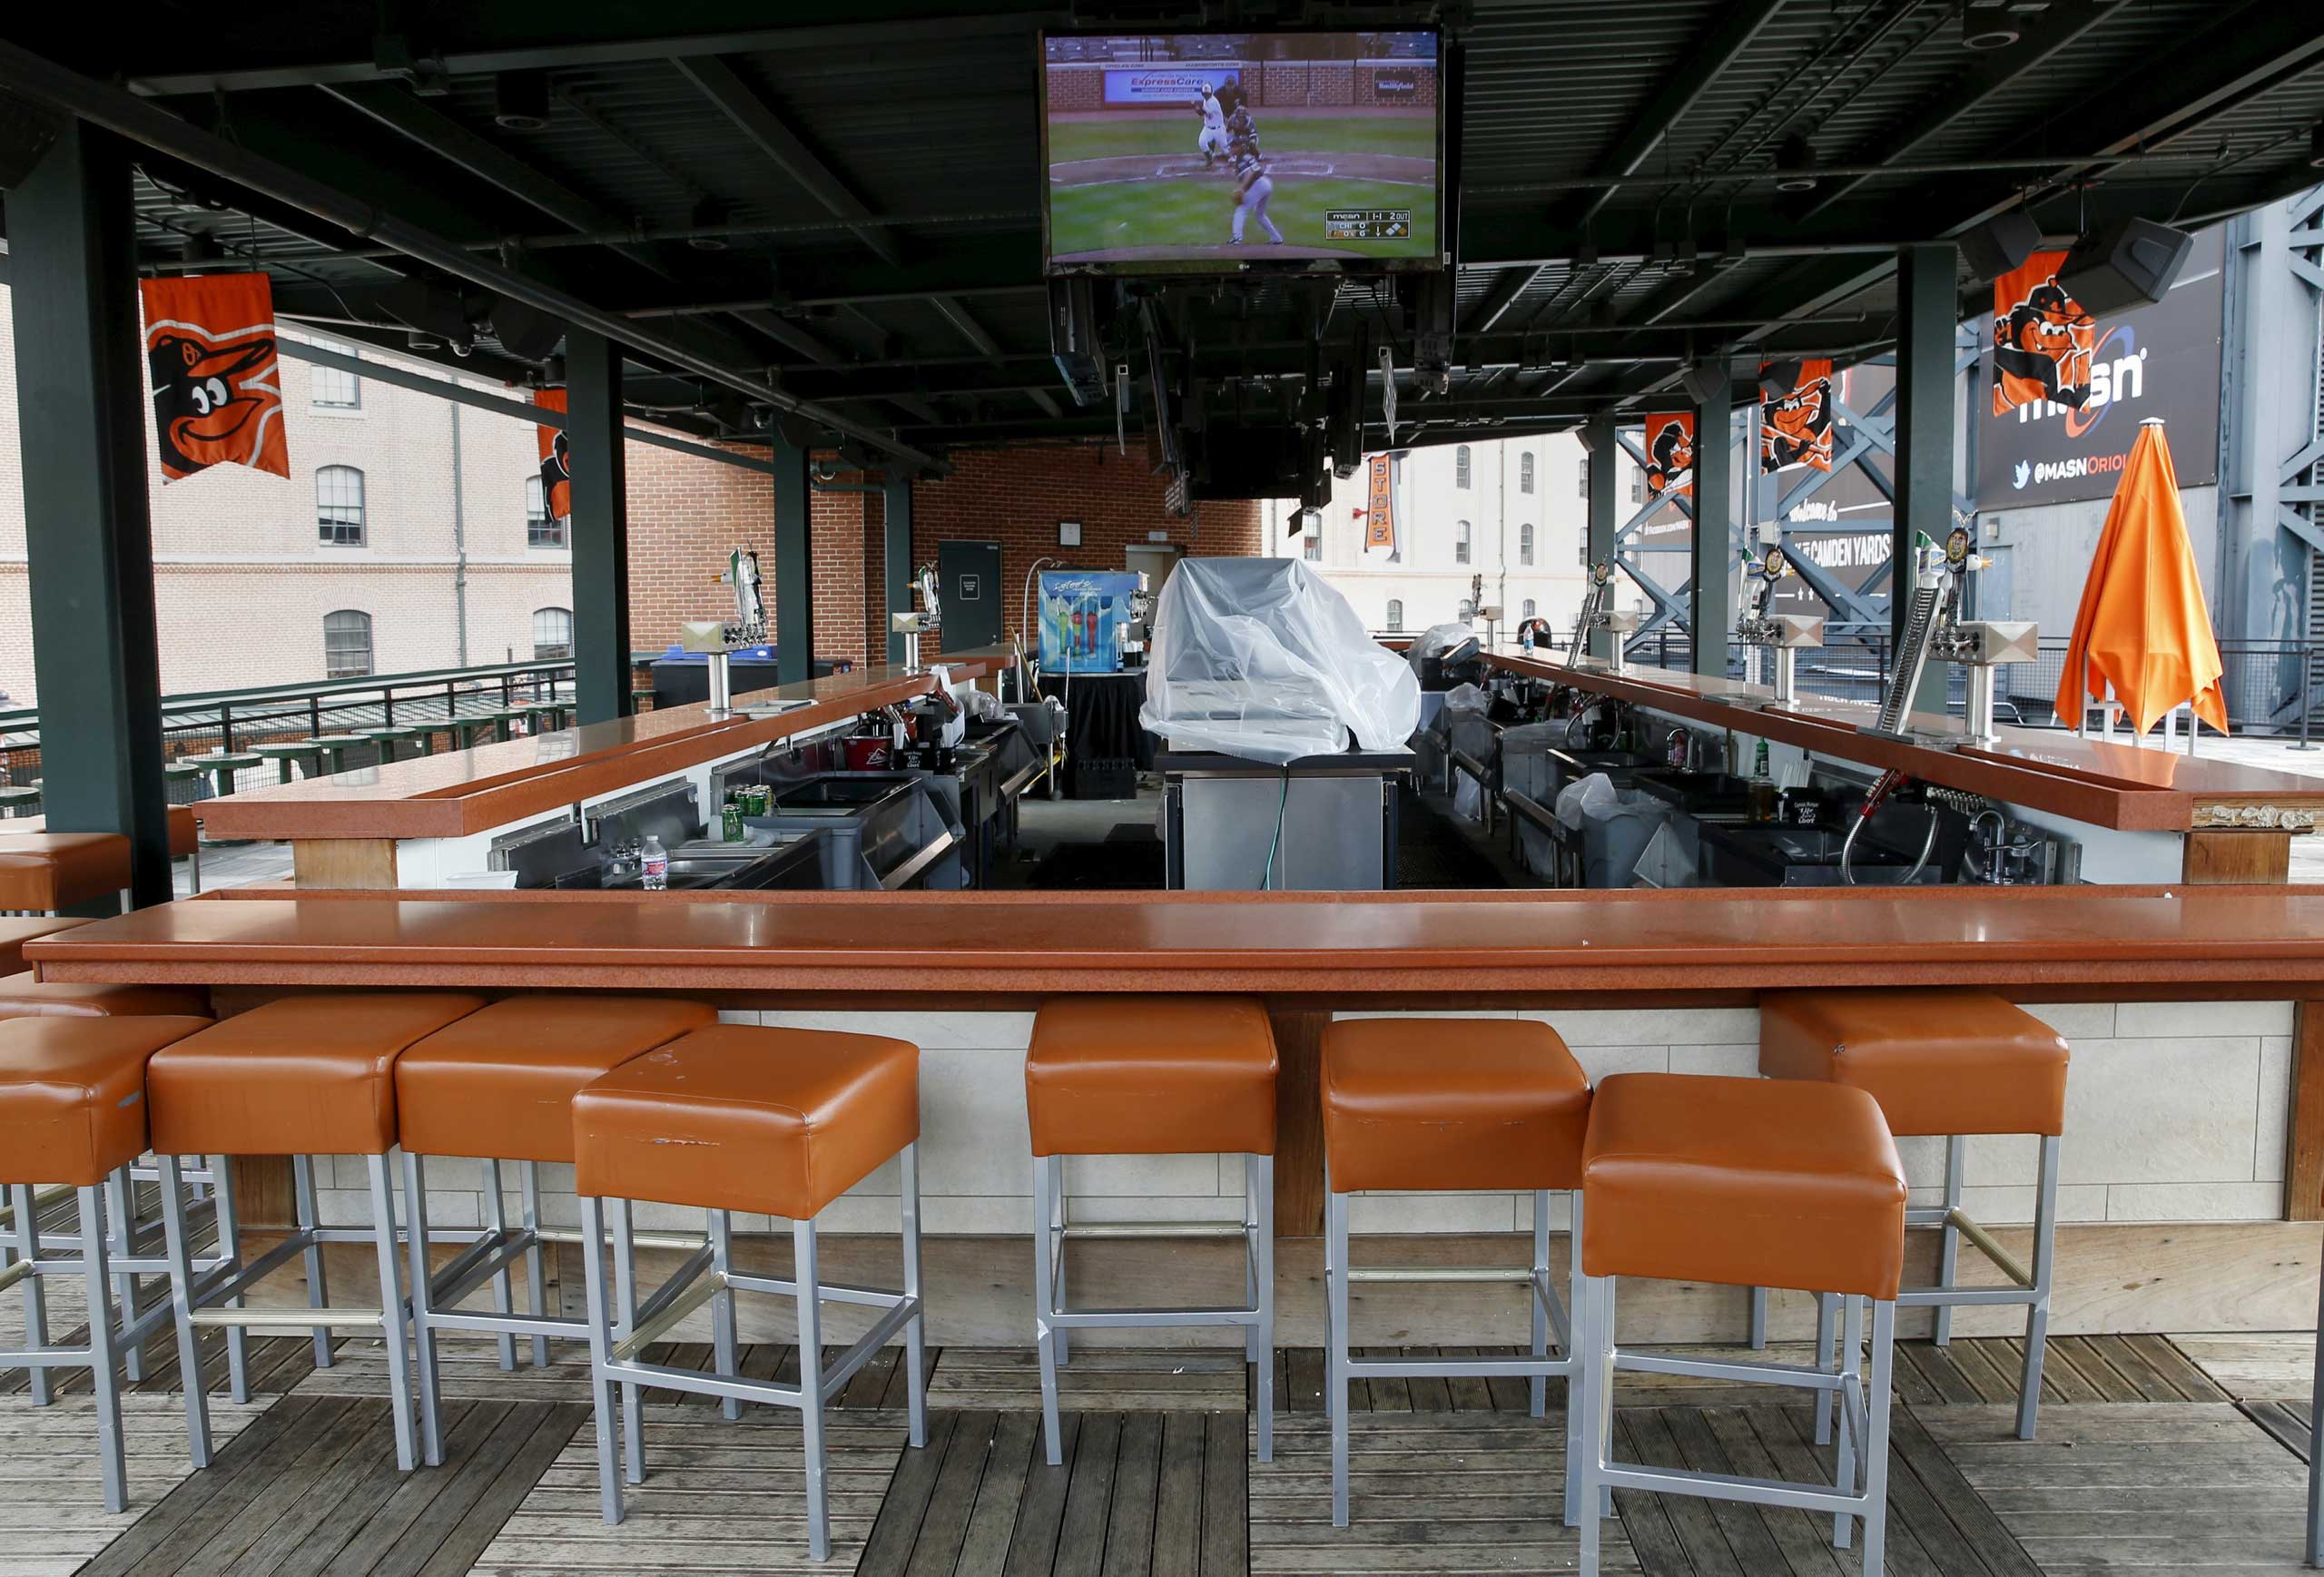 The Baltimore Orioles against Chicago White Sox American League baseball game is seen televised at an empty bar inside Oriole Park at Camden Yards in Baltimore on April 29, 2015.